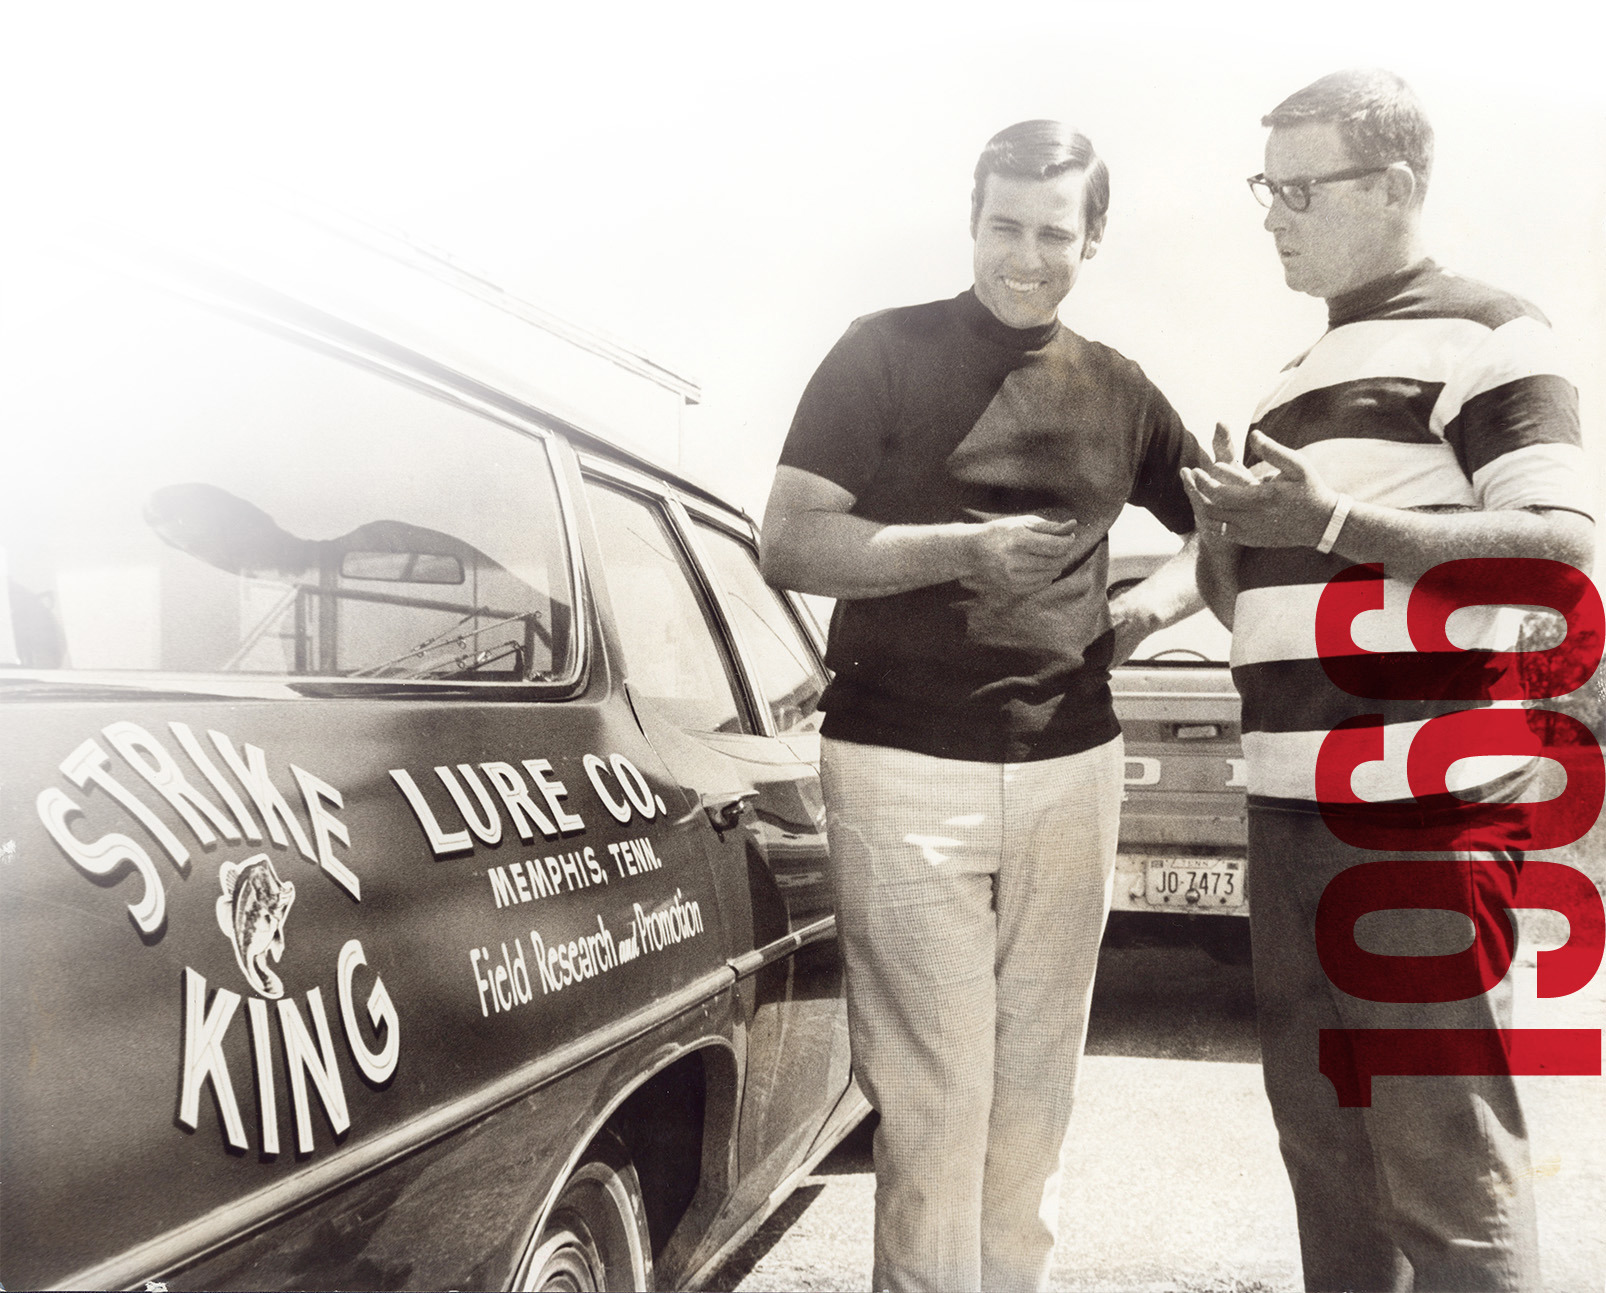 Charles_Spence_And_Bill McEwen_With_SK_Car